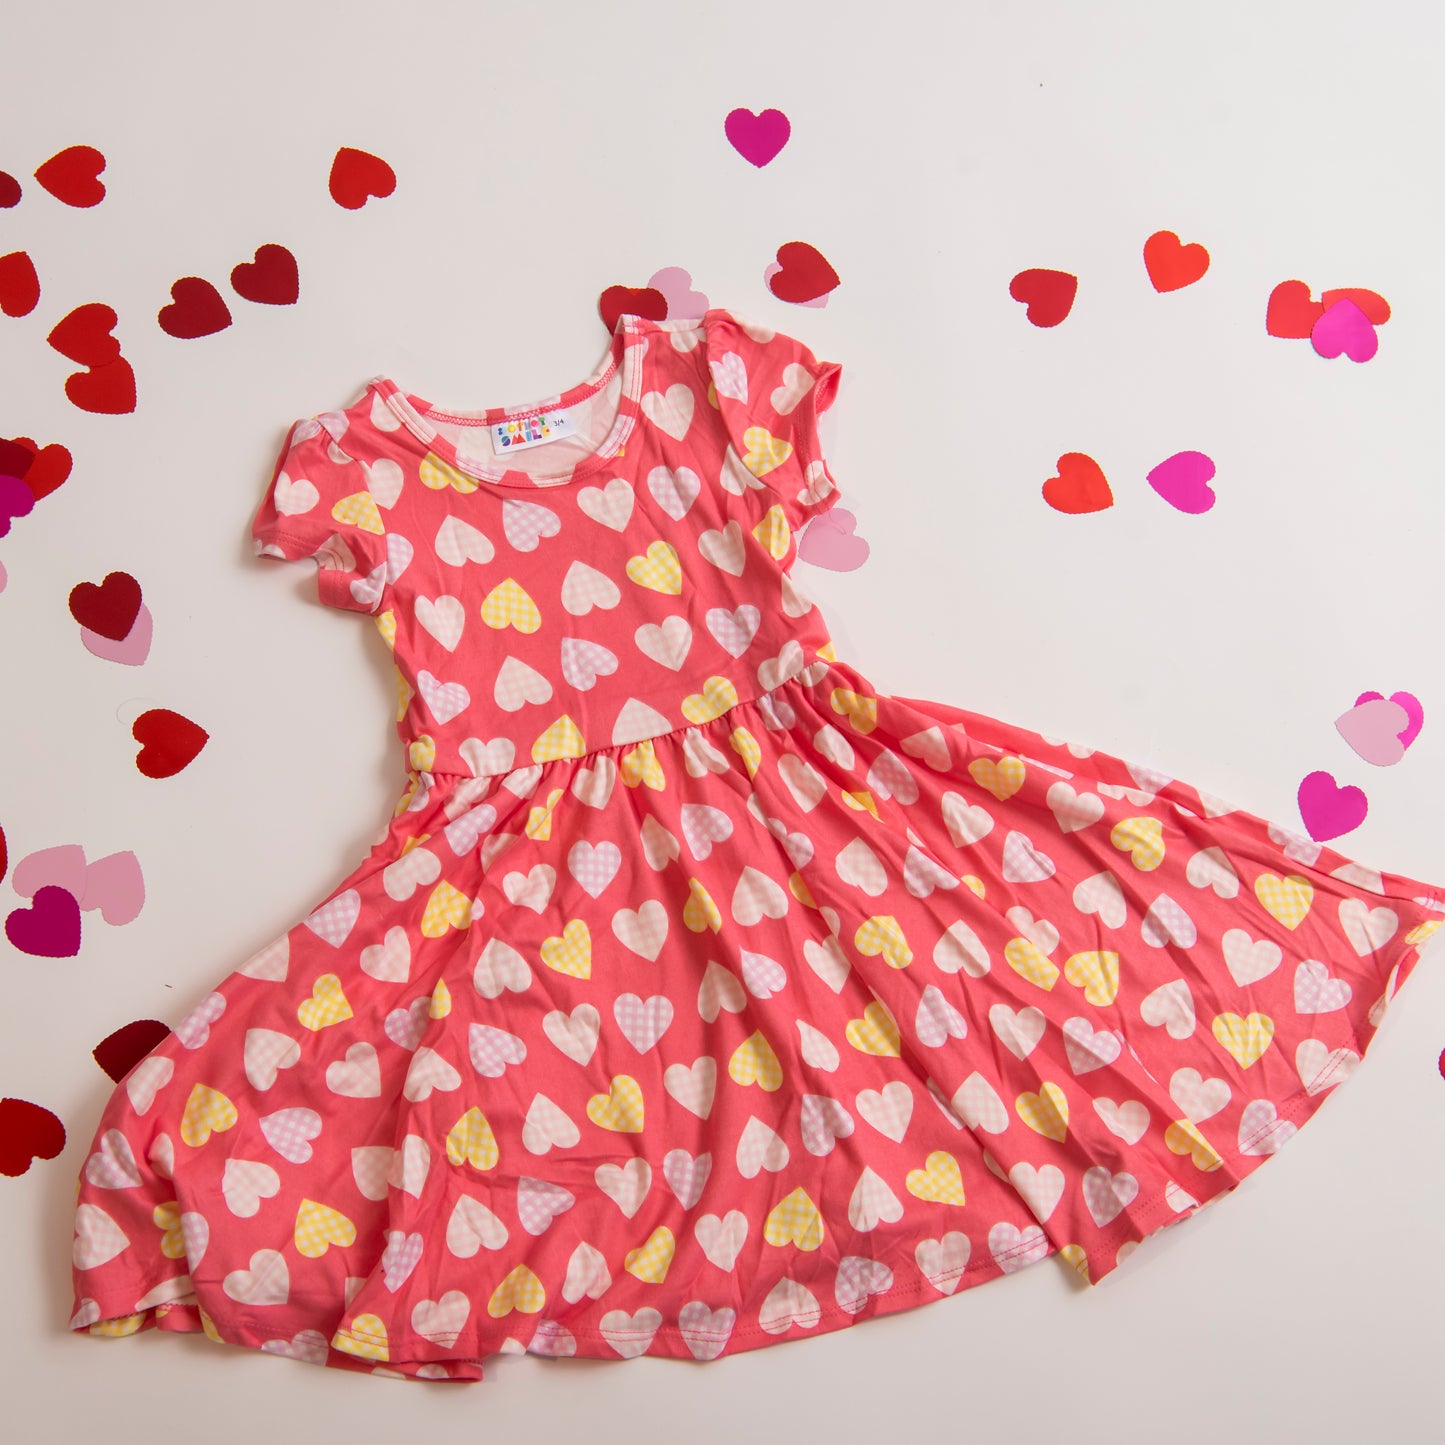 Pink Twirl Dress with Yellow and Pink Hearts